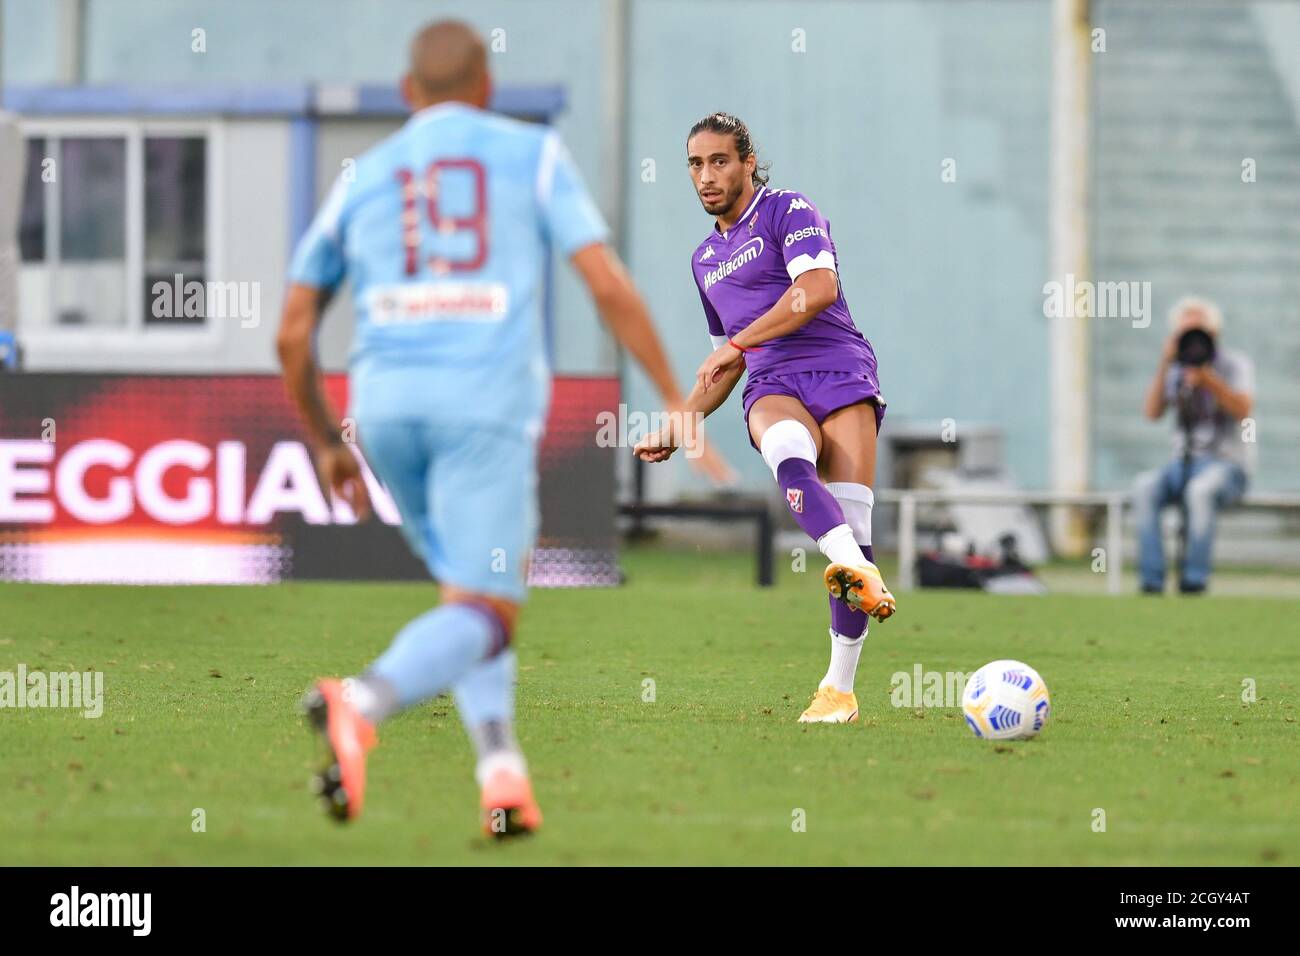 Florence, Italy. 12th Sep, 2020. Florence, Italy, 12 Sep 2020, Martin Caceres (Fiorentina) during Fiorentina vs Reggiana - Soccer Test Match - Credit: LM/Lisa Guglielmi Credit: Lisa Guglielmi/LPS/ZUMA Wire/Alamy Live News Stock Photo